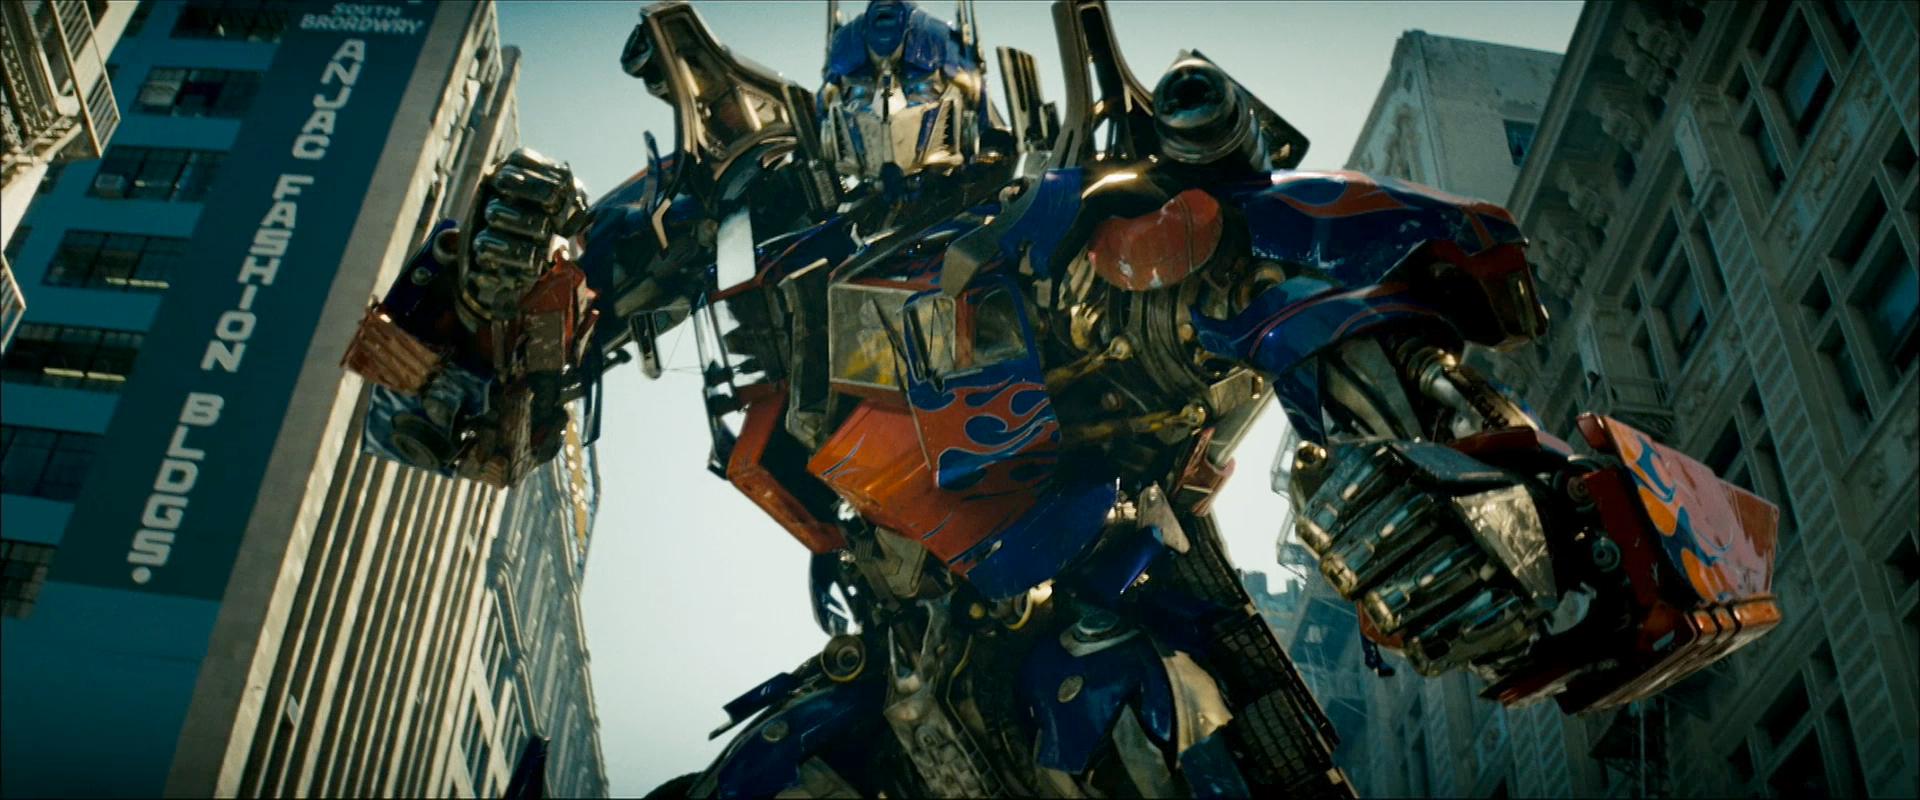 Optimus Prime standing tall in a vibrant HD desktop background.